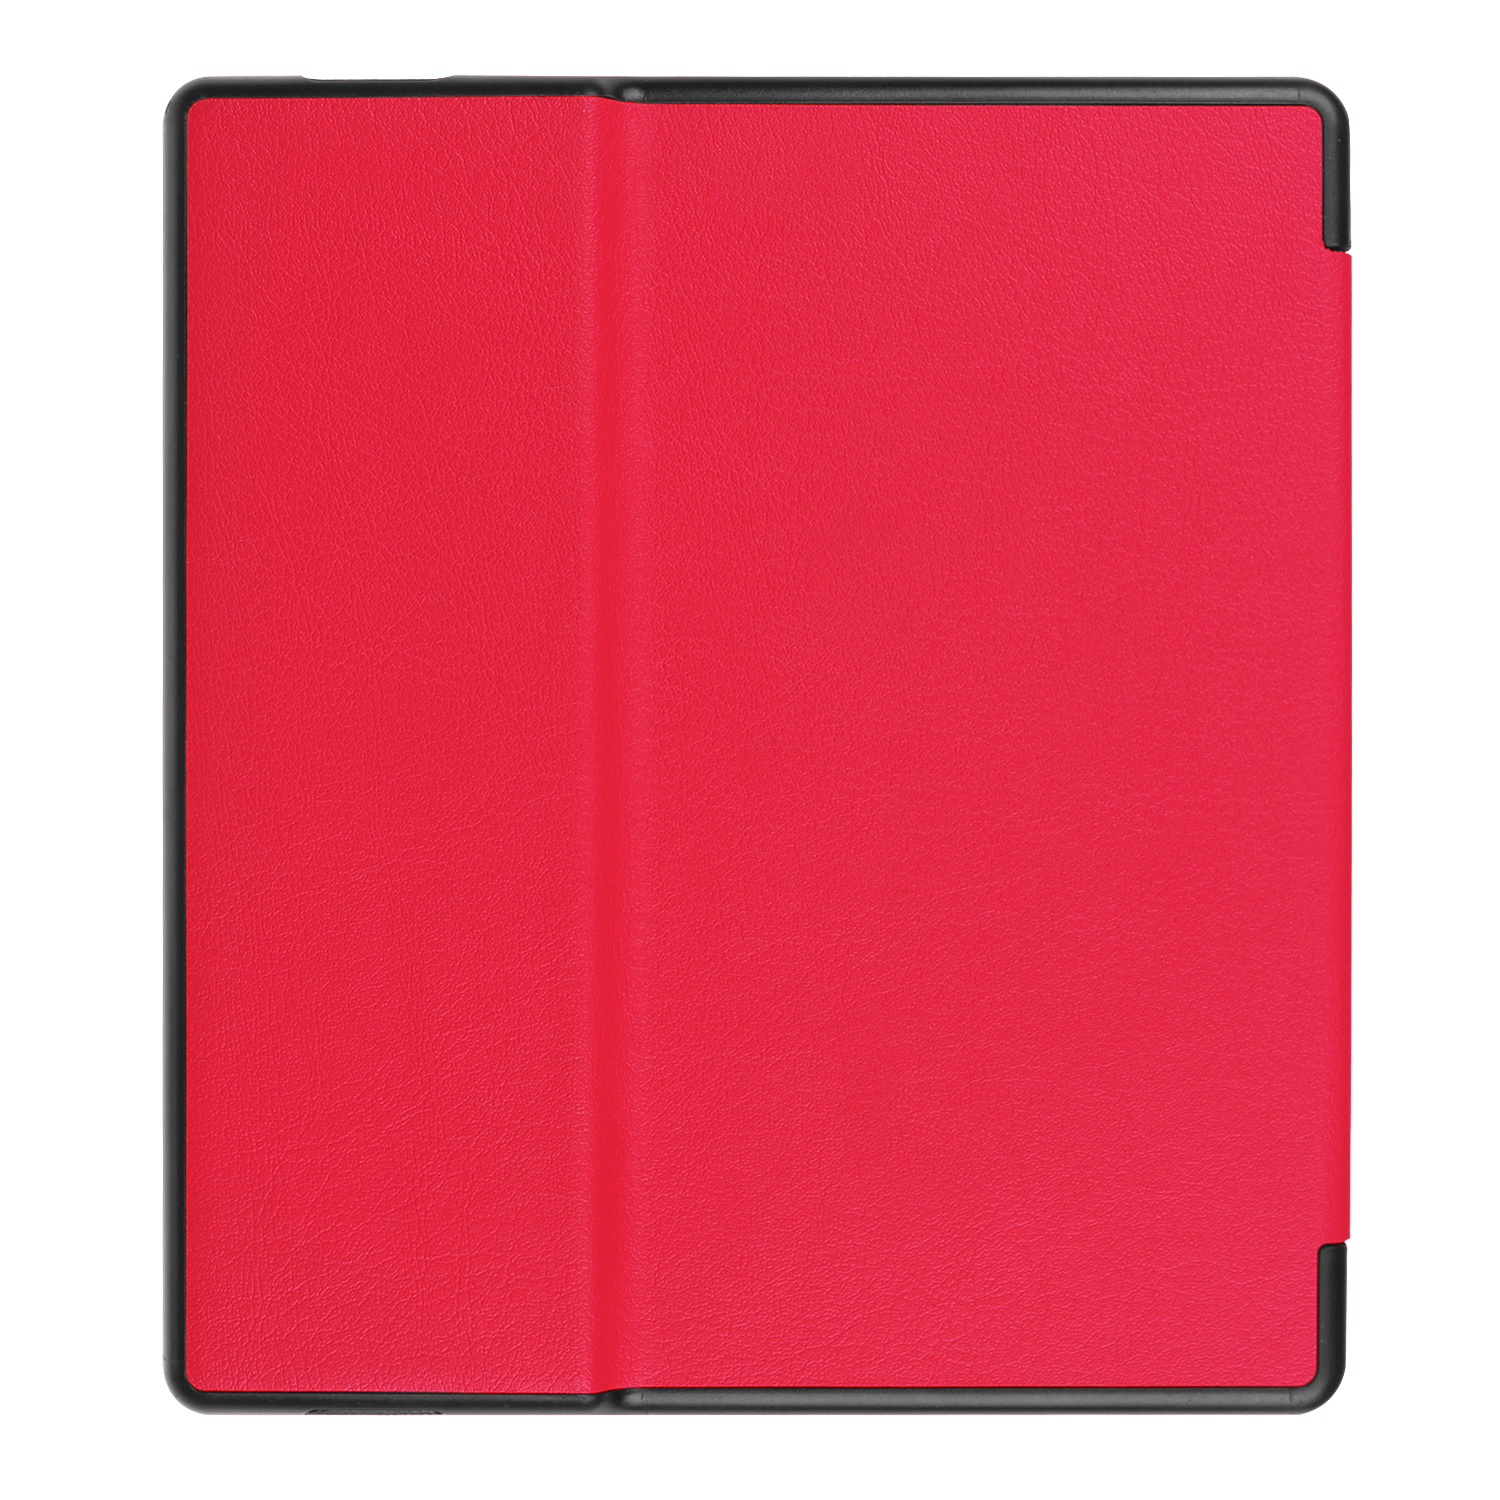 Allytech Kindle Oasis Case (2019/2017, 10th / 9th Generation), Ultra Slim PU Leather Trifold Stand Smart Shell Auto Sleep Wake Magnetic Shockproof Case for All-New Amazon Kinlde Oasis, Red - image 3 of 6